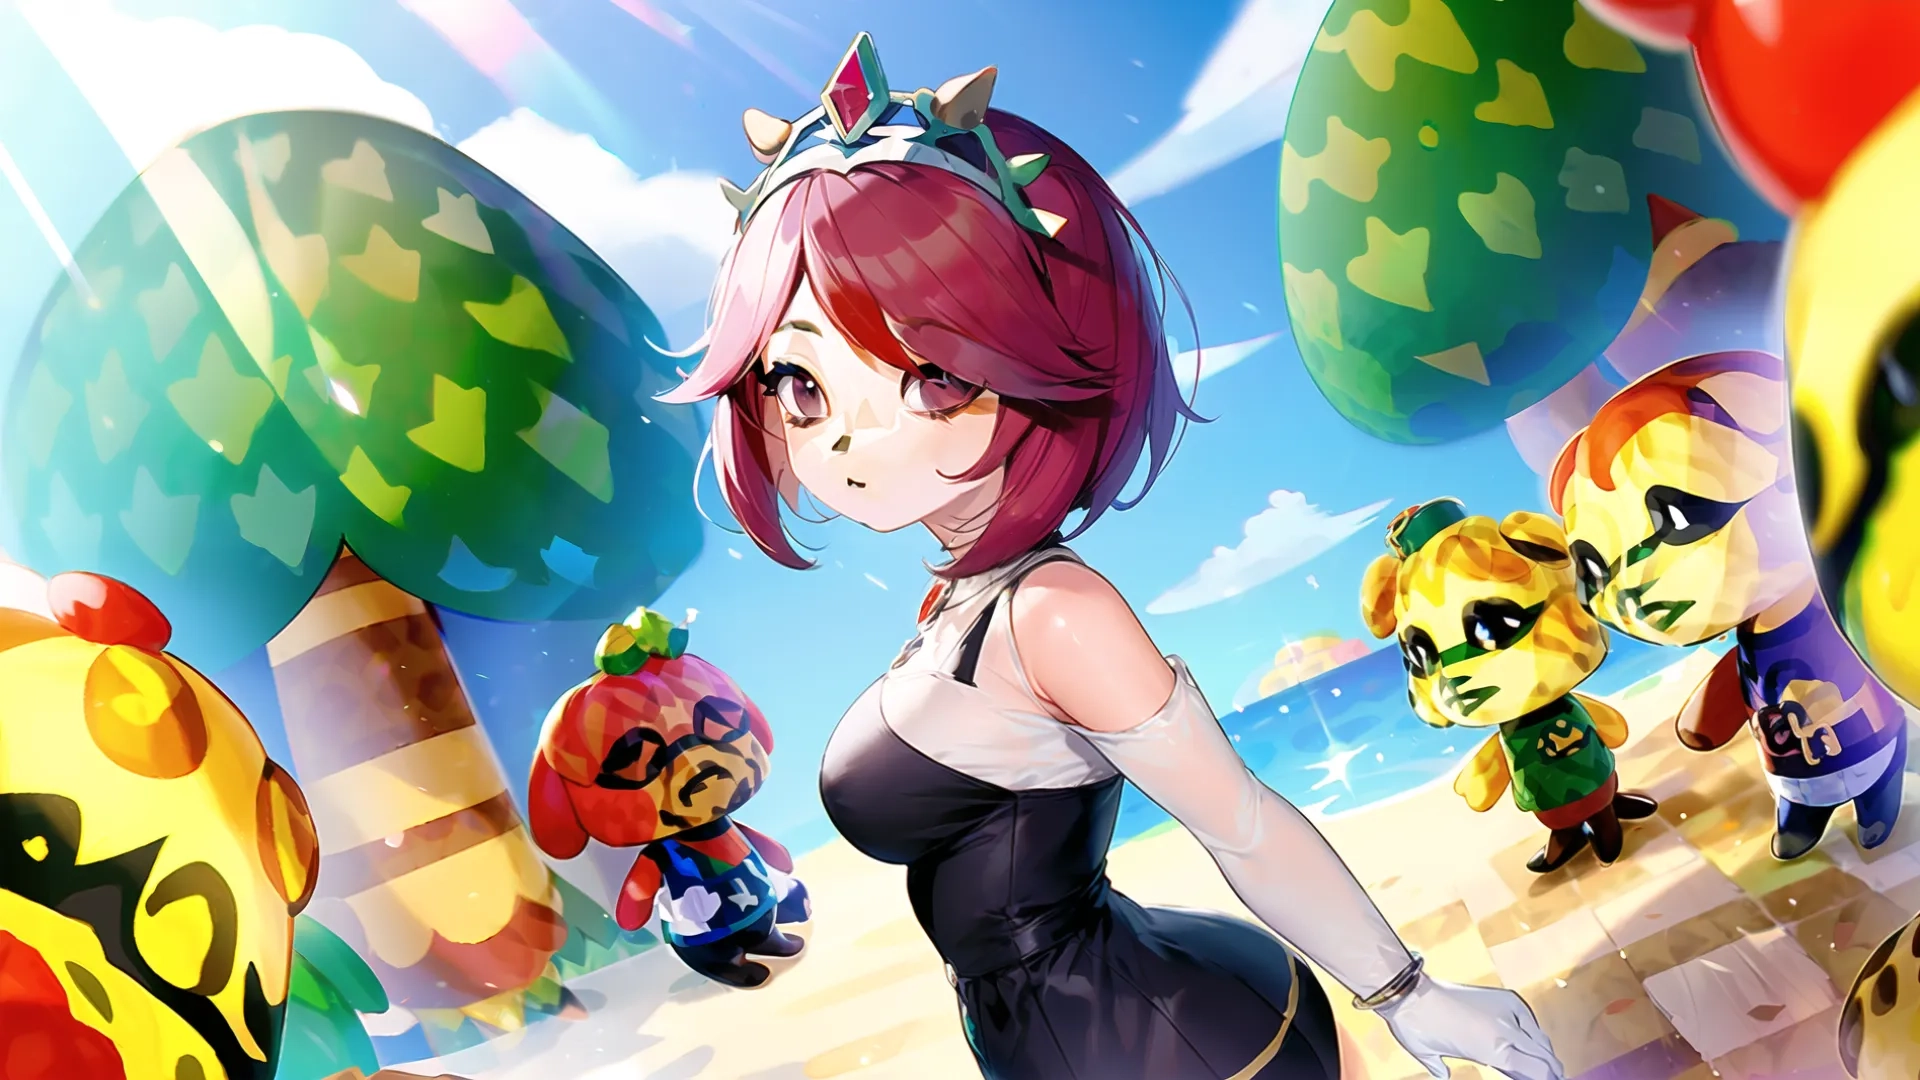 an anime girl posing in front of a cartoon style background as she stands between two cute stuffed animals and trees in the background with other characters behind
